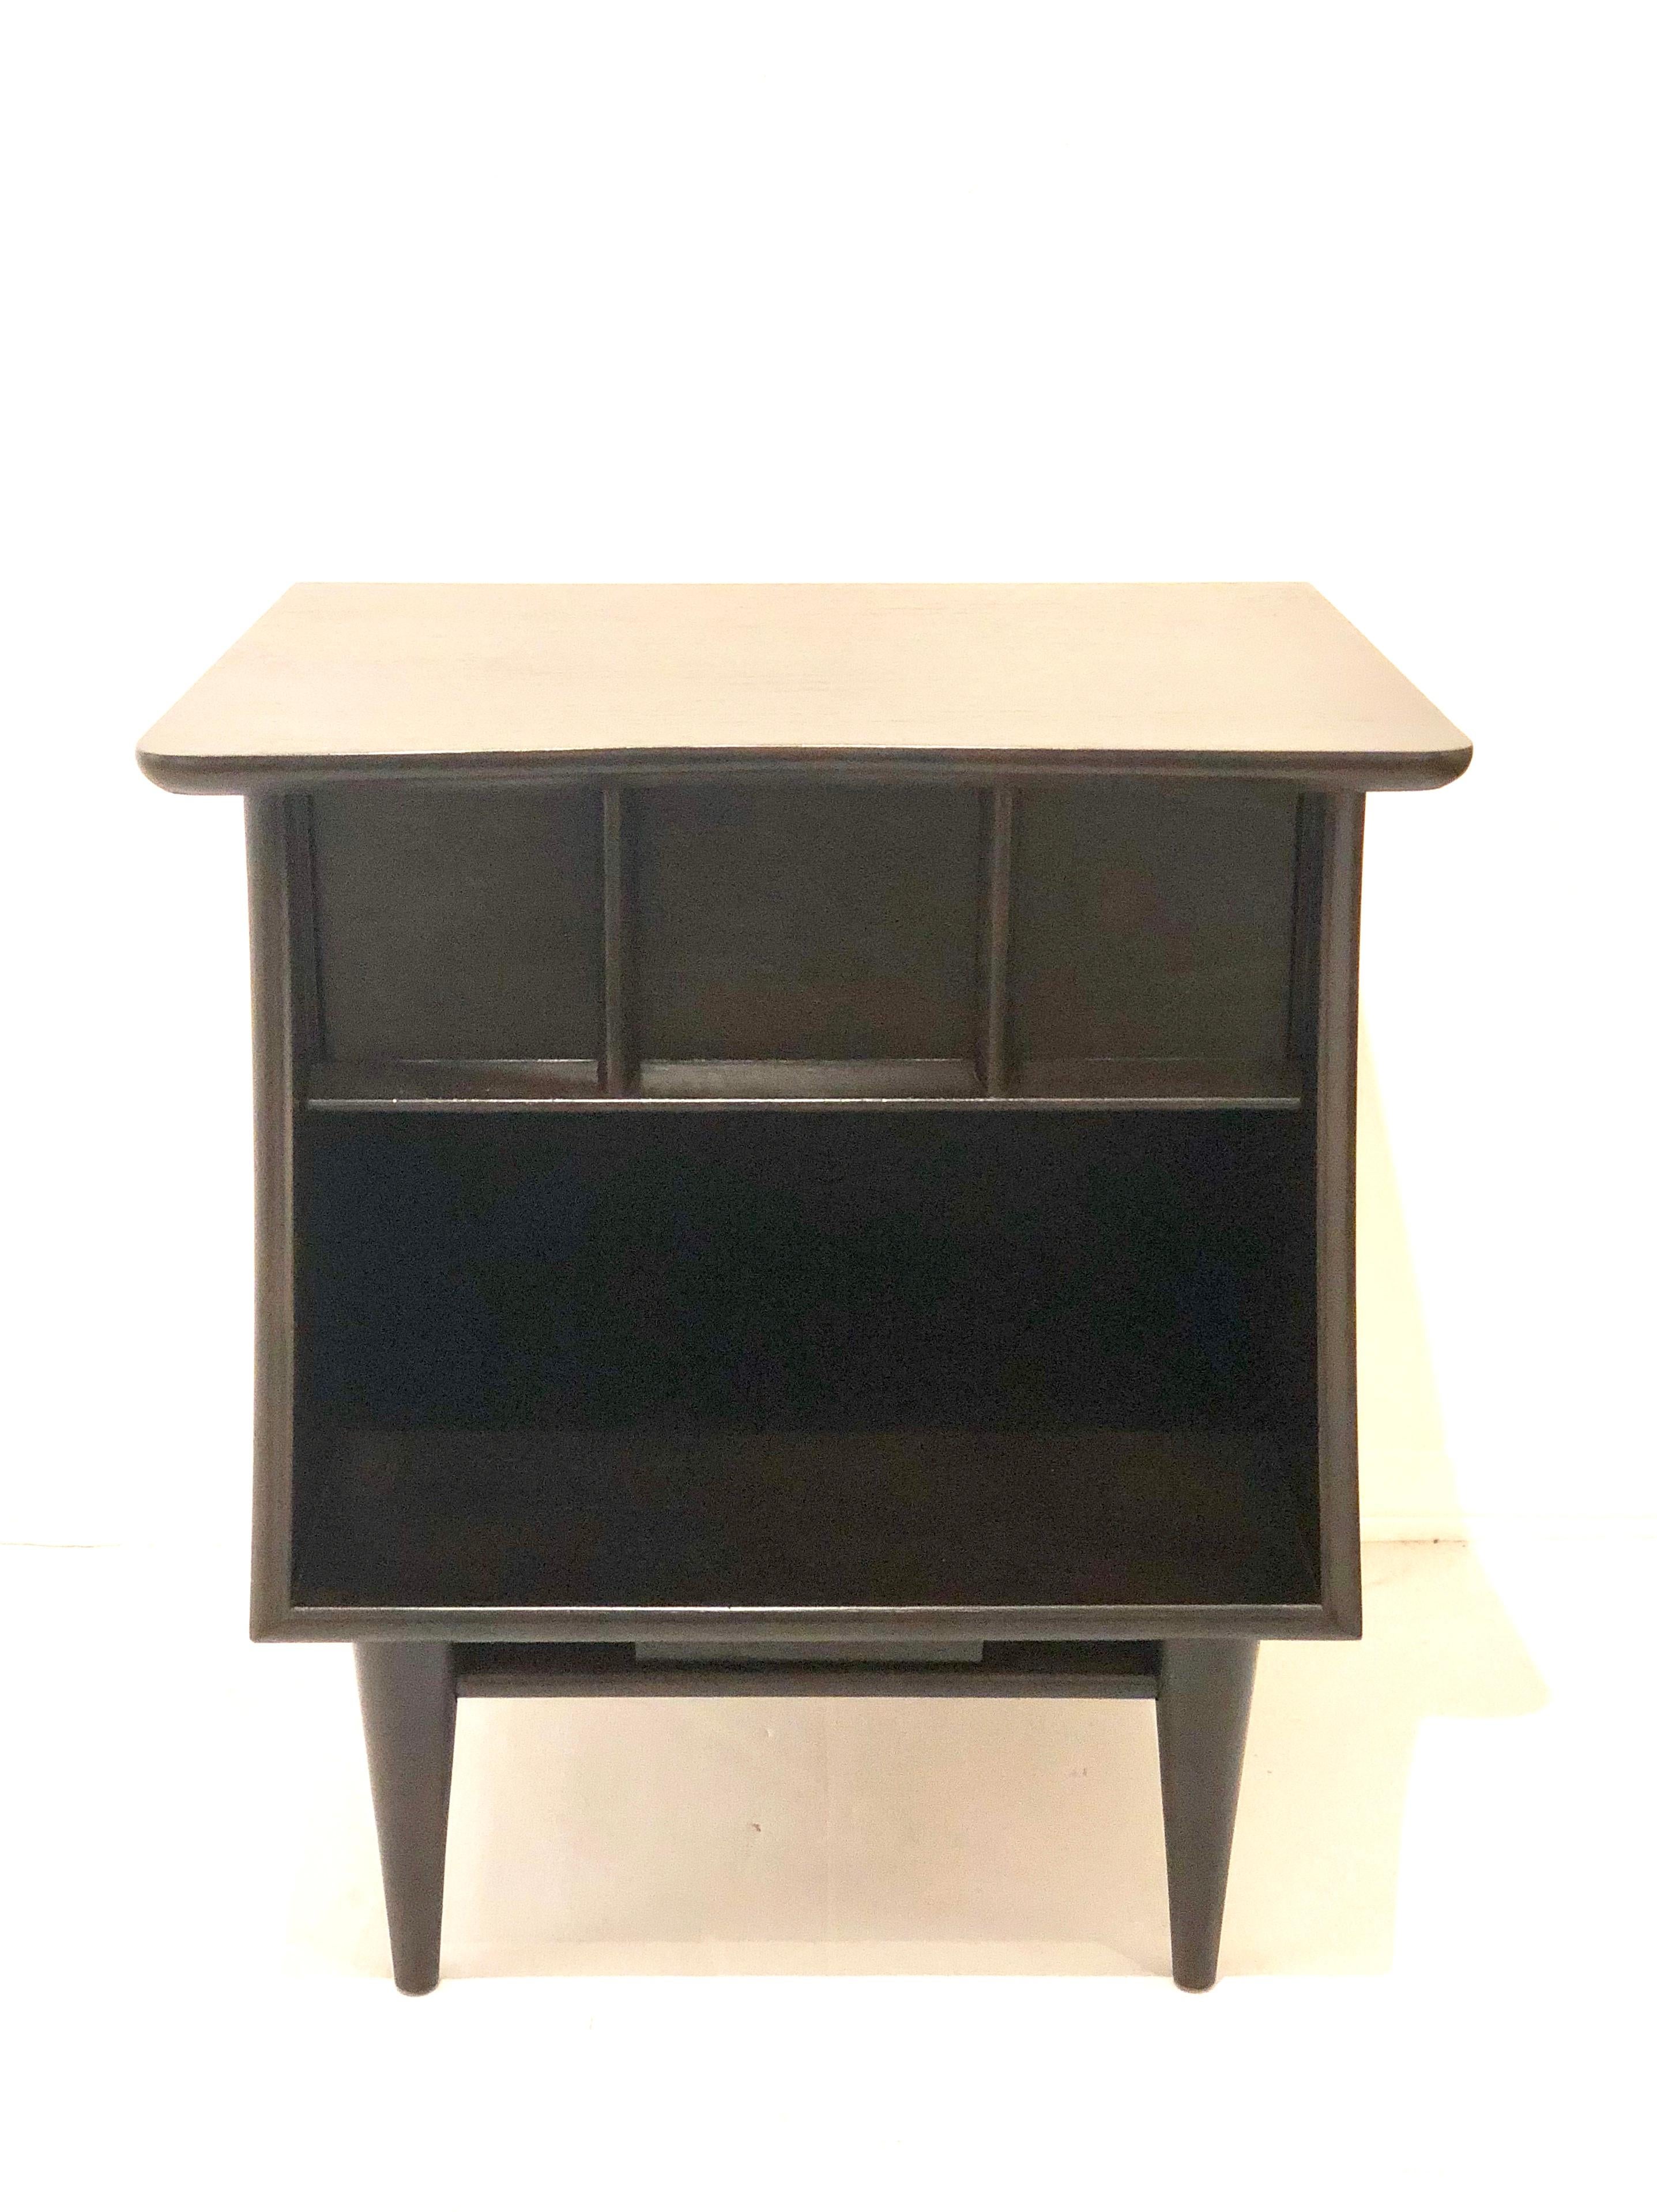 Nice pair of freshly refinished nightstands by Kent Coffey, nice shape Classic midcentury design in a dark chocolate finish. Single drawer solid and sturdy.